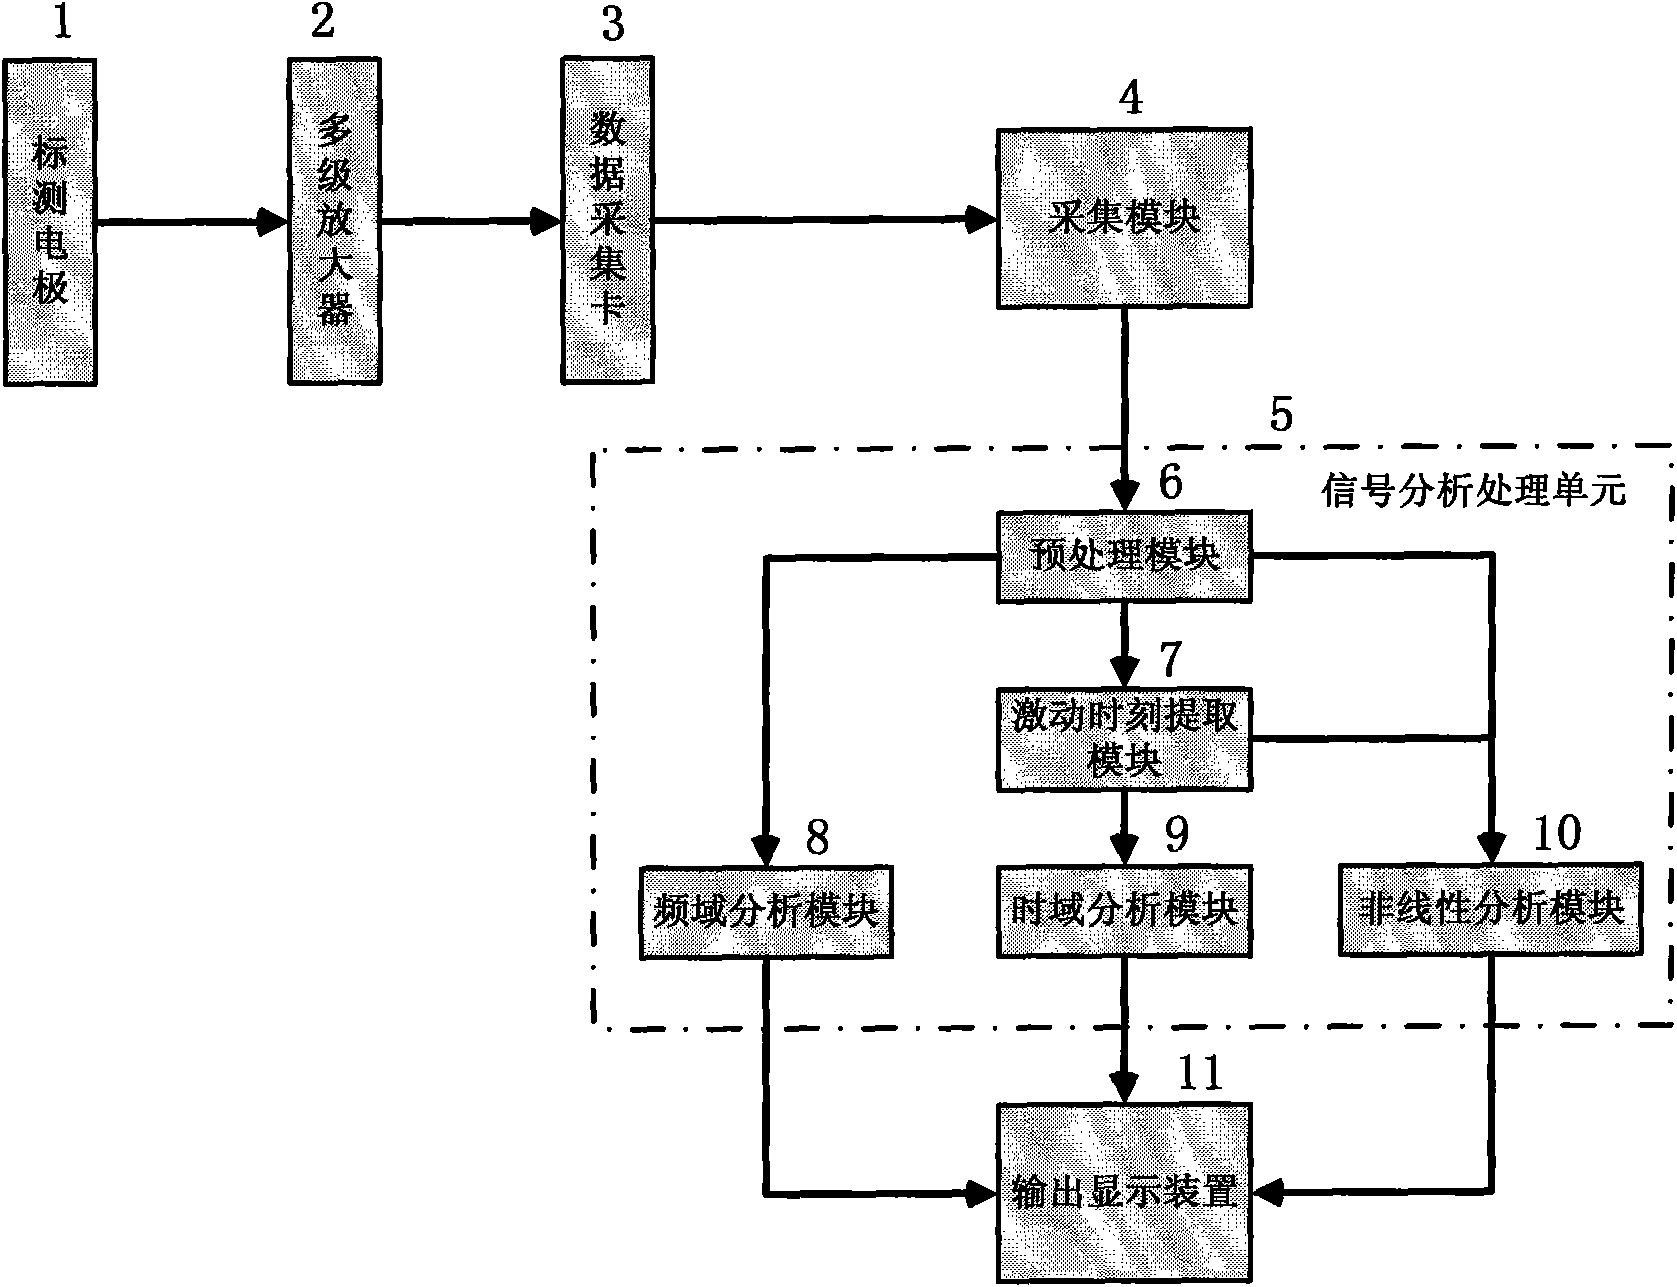 Cardiac mapping signal analyzing and processing device and method